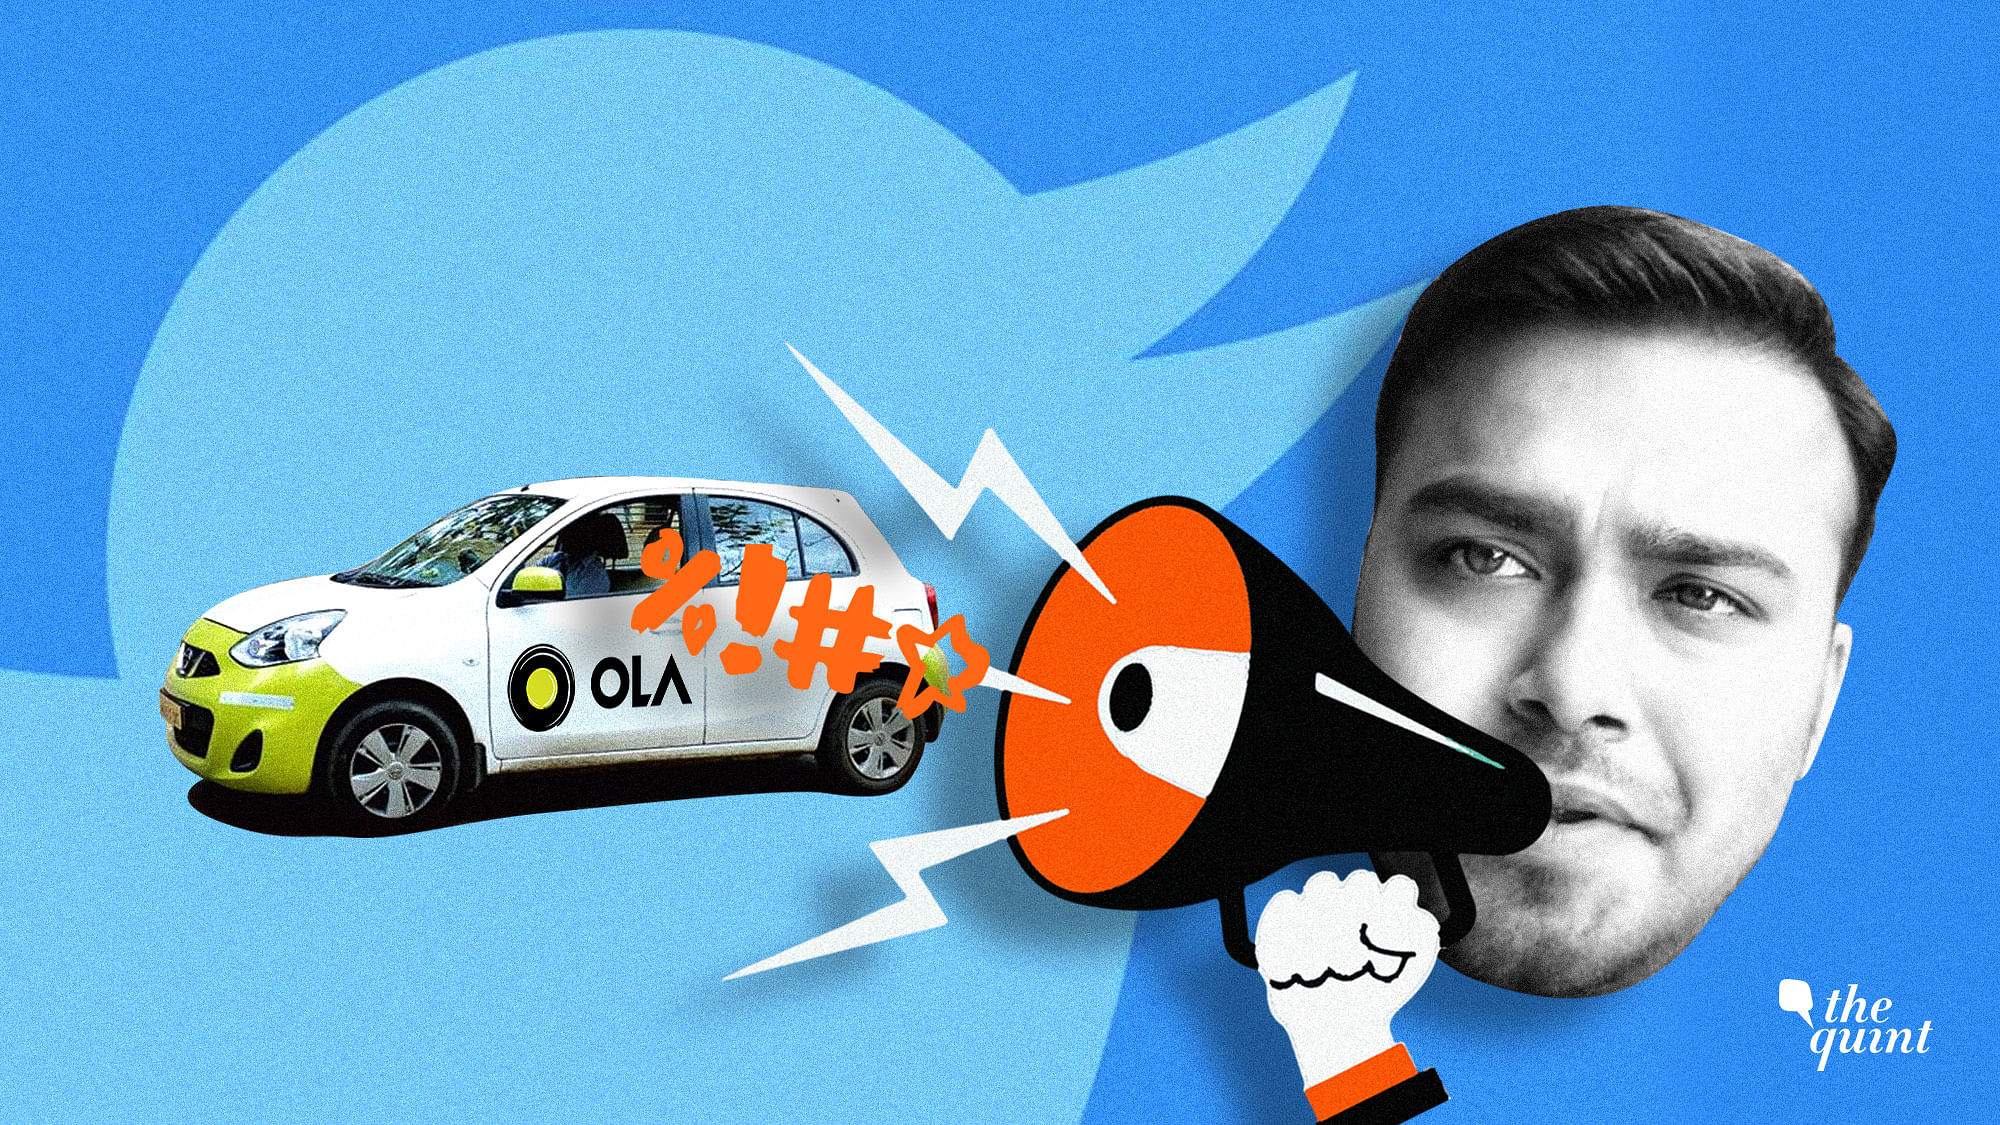 Abhishek Mishra cancelled an Ola cab ride because the driver was Muslim, and boasted about it online.